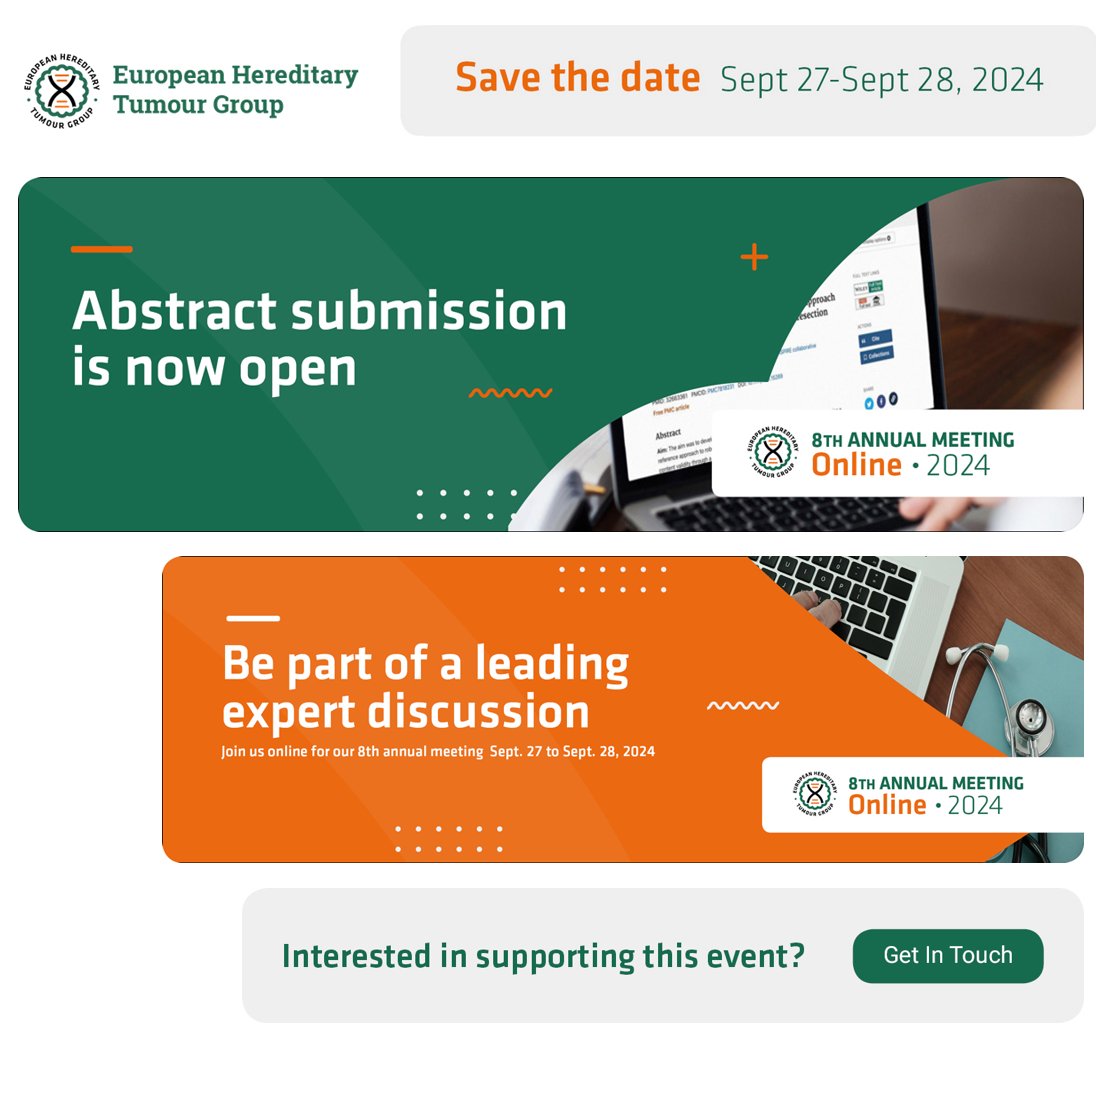 Abstract submission for EHTG 2024 is now open! Be sure to submit your research before June 5th and get a chance to present your data at the EHTG Virtual meeting this year. Follow the link below for more information. linktr.ee/ehtg.org #callforabstracts #ehtg2024 #conference